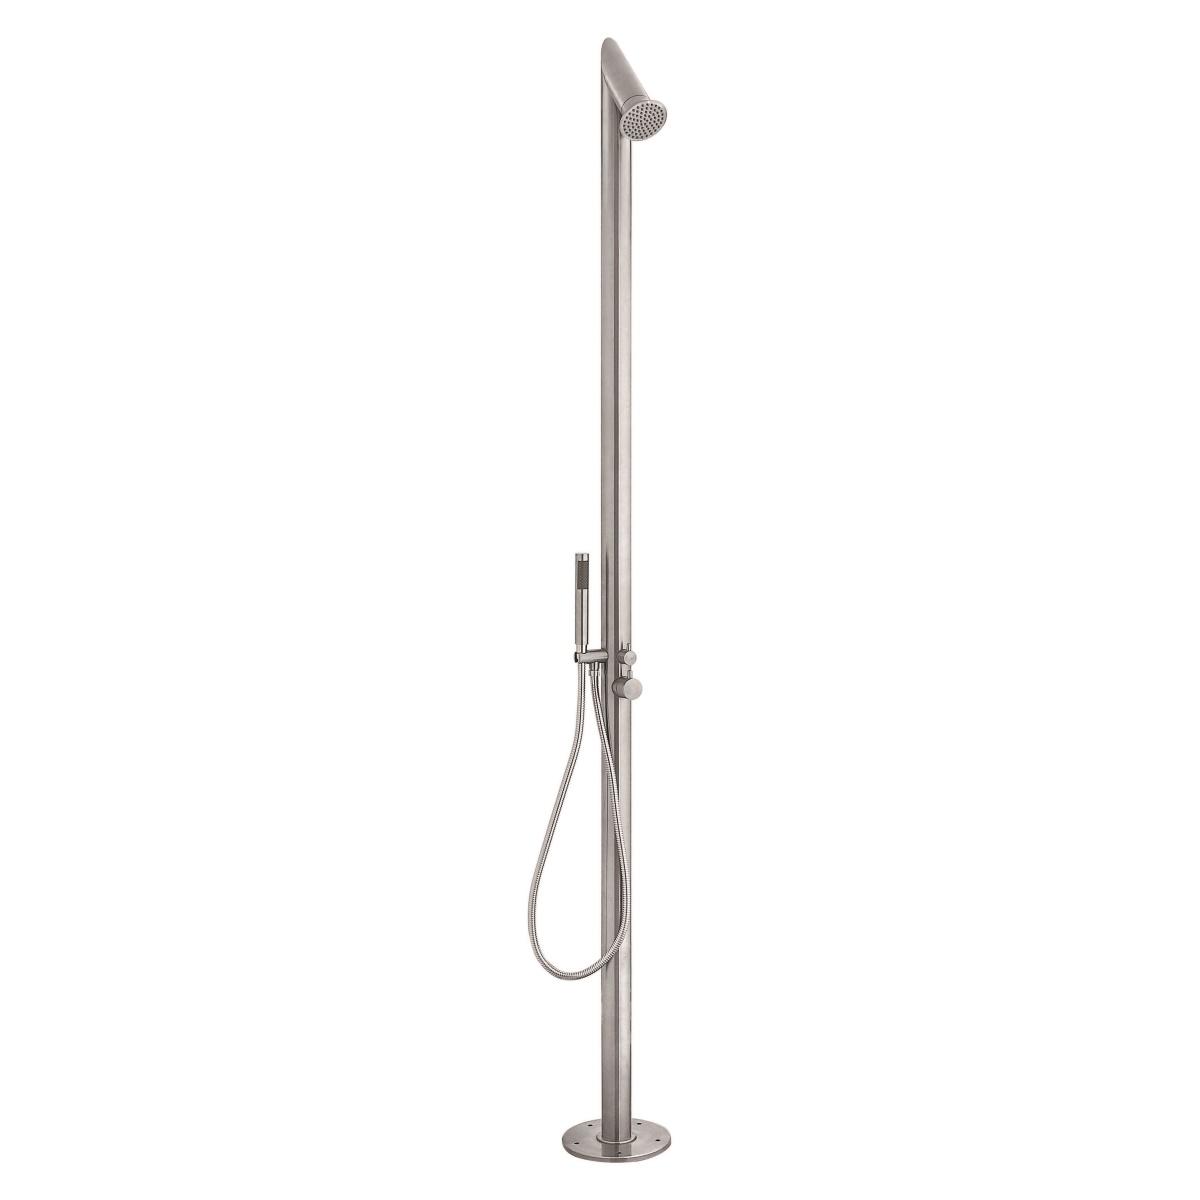 YS78642B 2-Function 304 or 316l Outdoor Pool Shower Column For Poolside Resorts, Beachfront High Corrosion Area